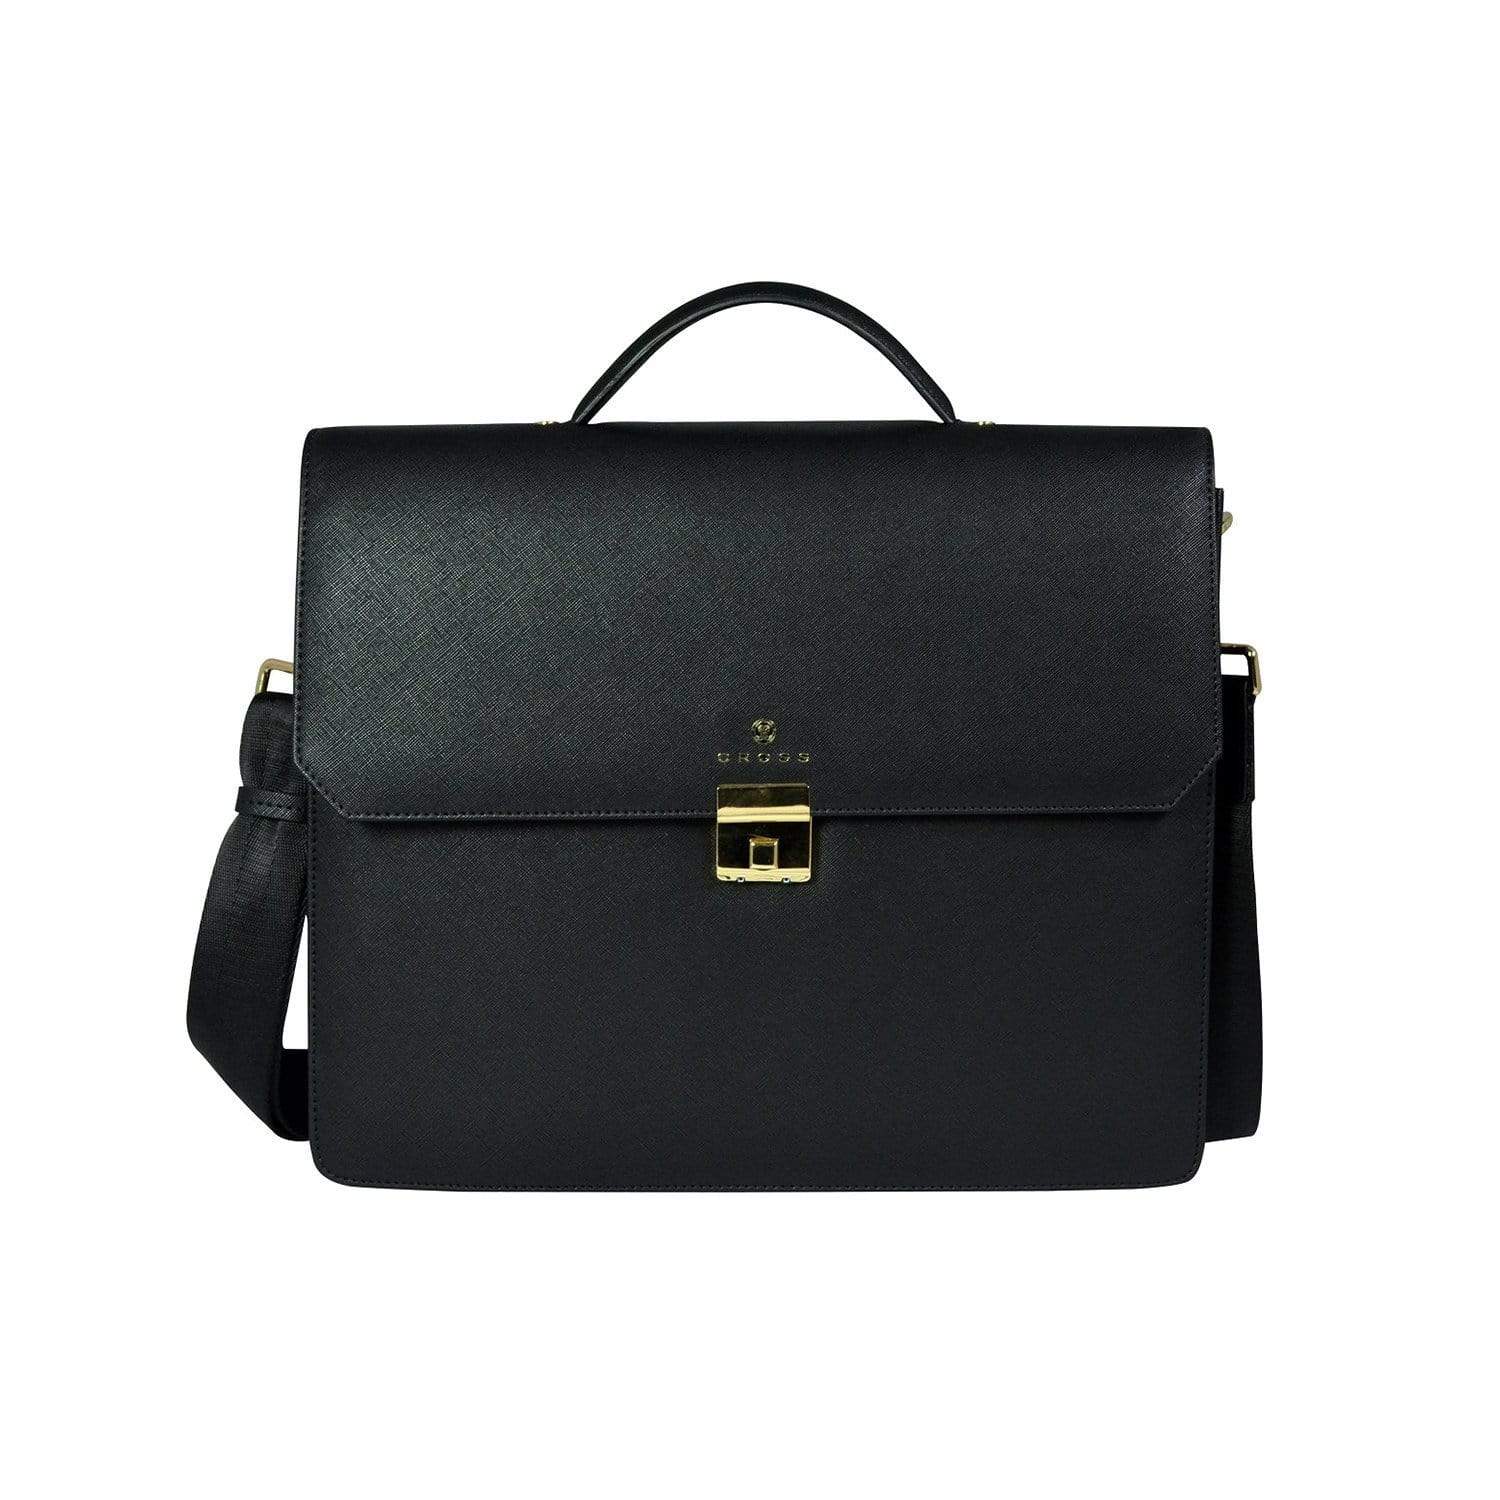 Cross First Class Leather Briefcase for Men  - Black - AC791173-1-1 - Jashanmal Home